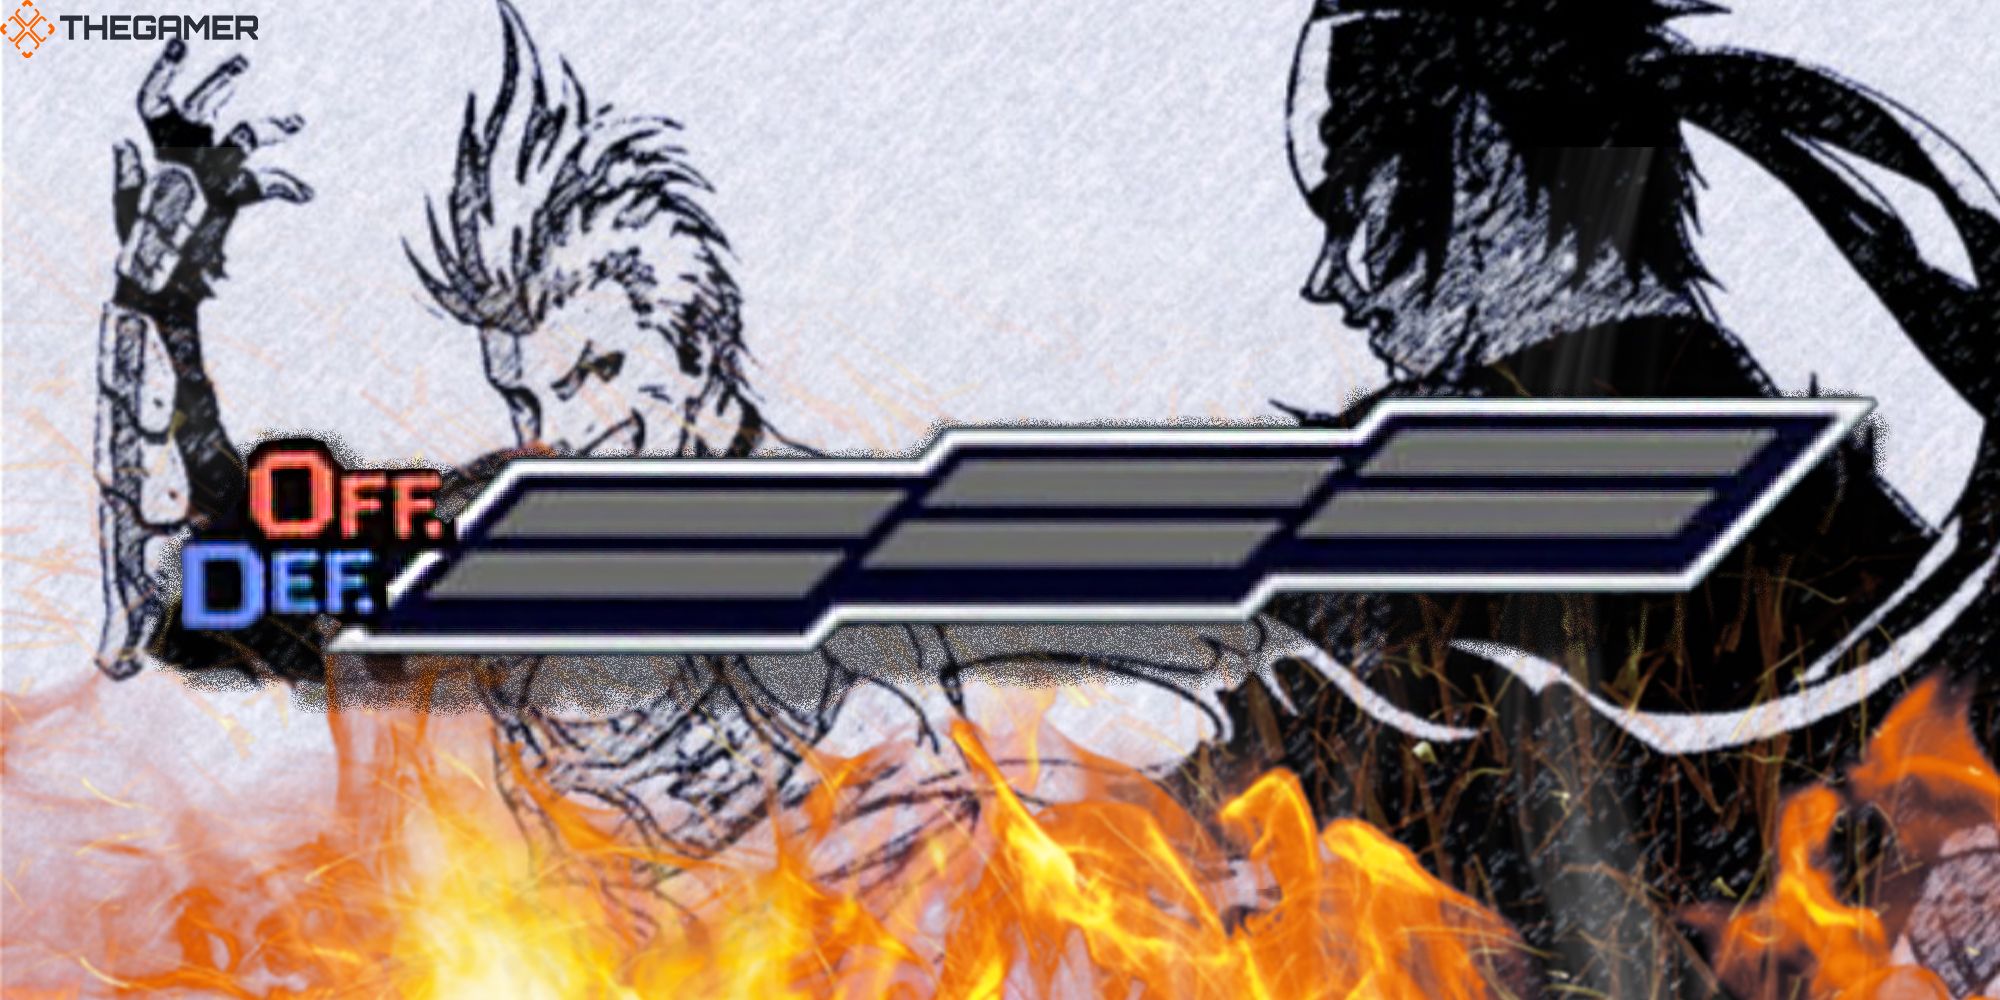 The Rumble Fish 2's Offense/Defense Gauge in front of Lud, Zen, and a wall of fire. Feature Image for TG.